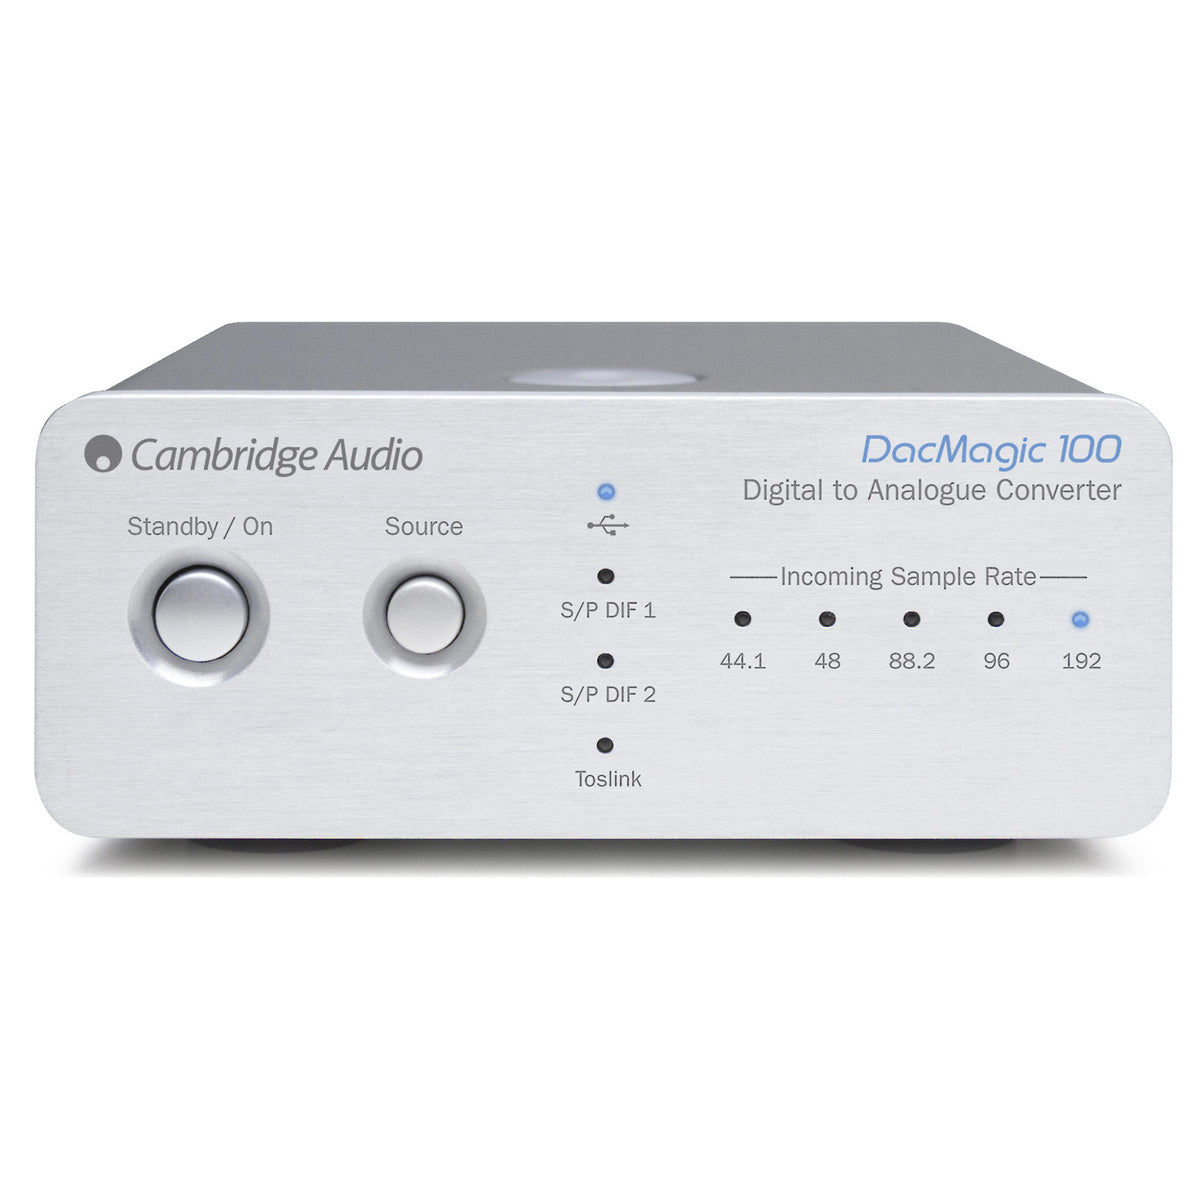 How to Choose a DAC